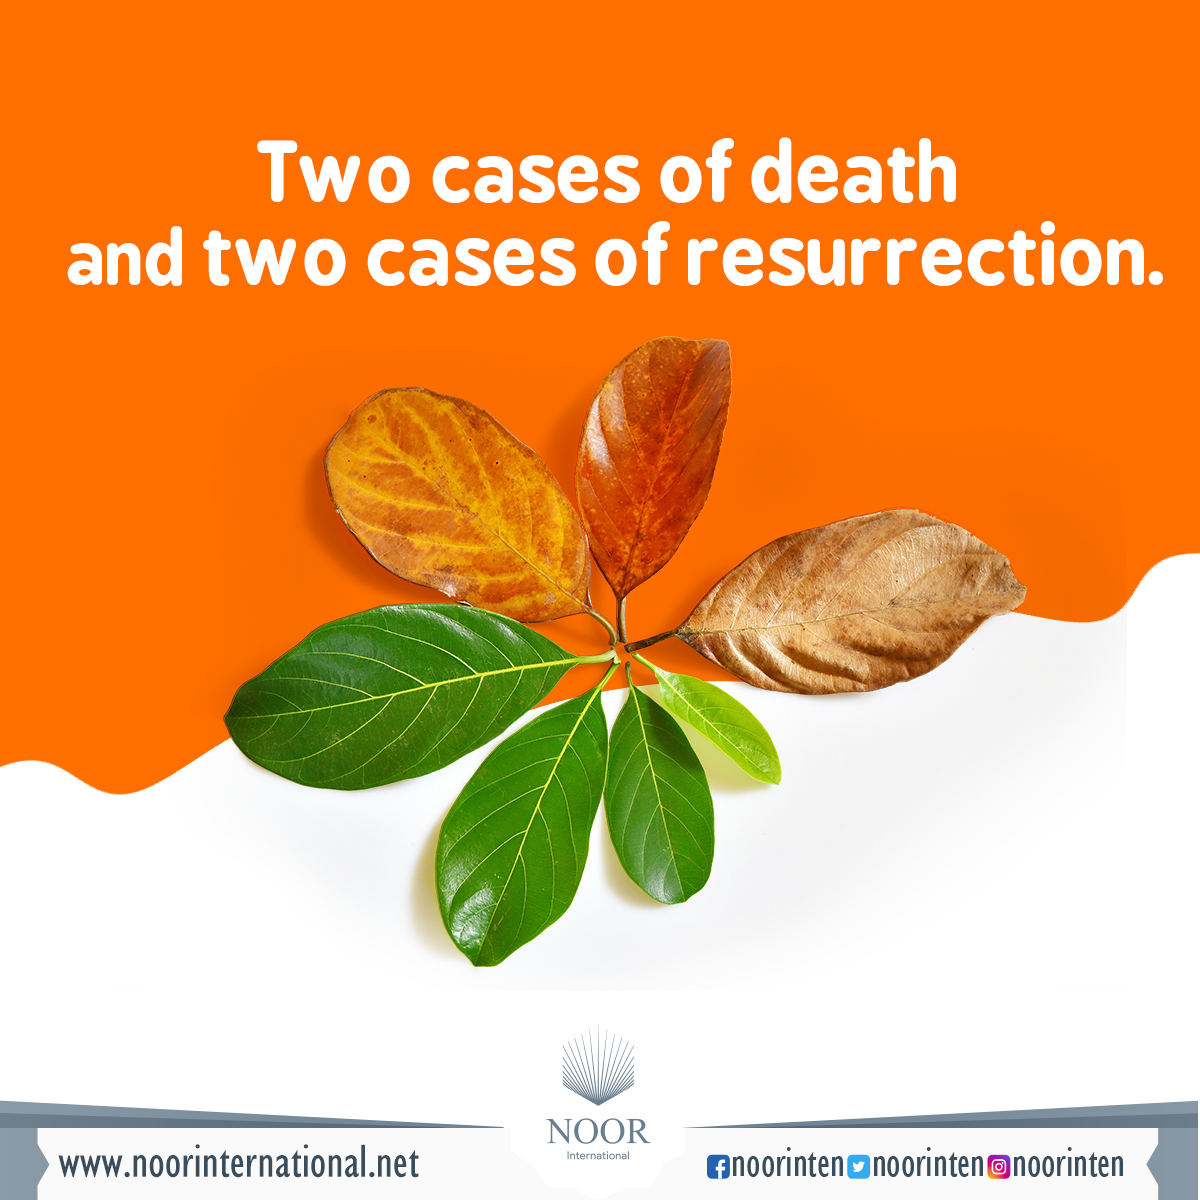 Two cases of death and two cases of resurrection.